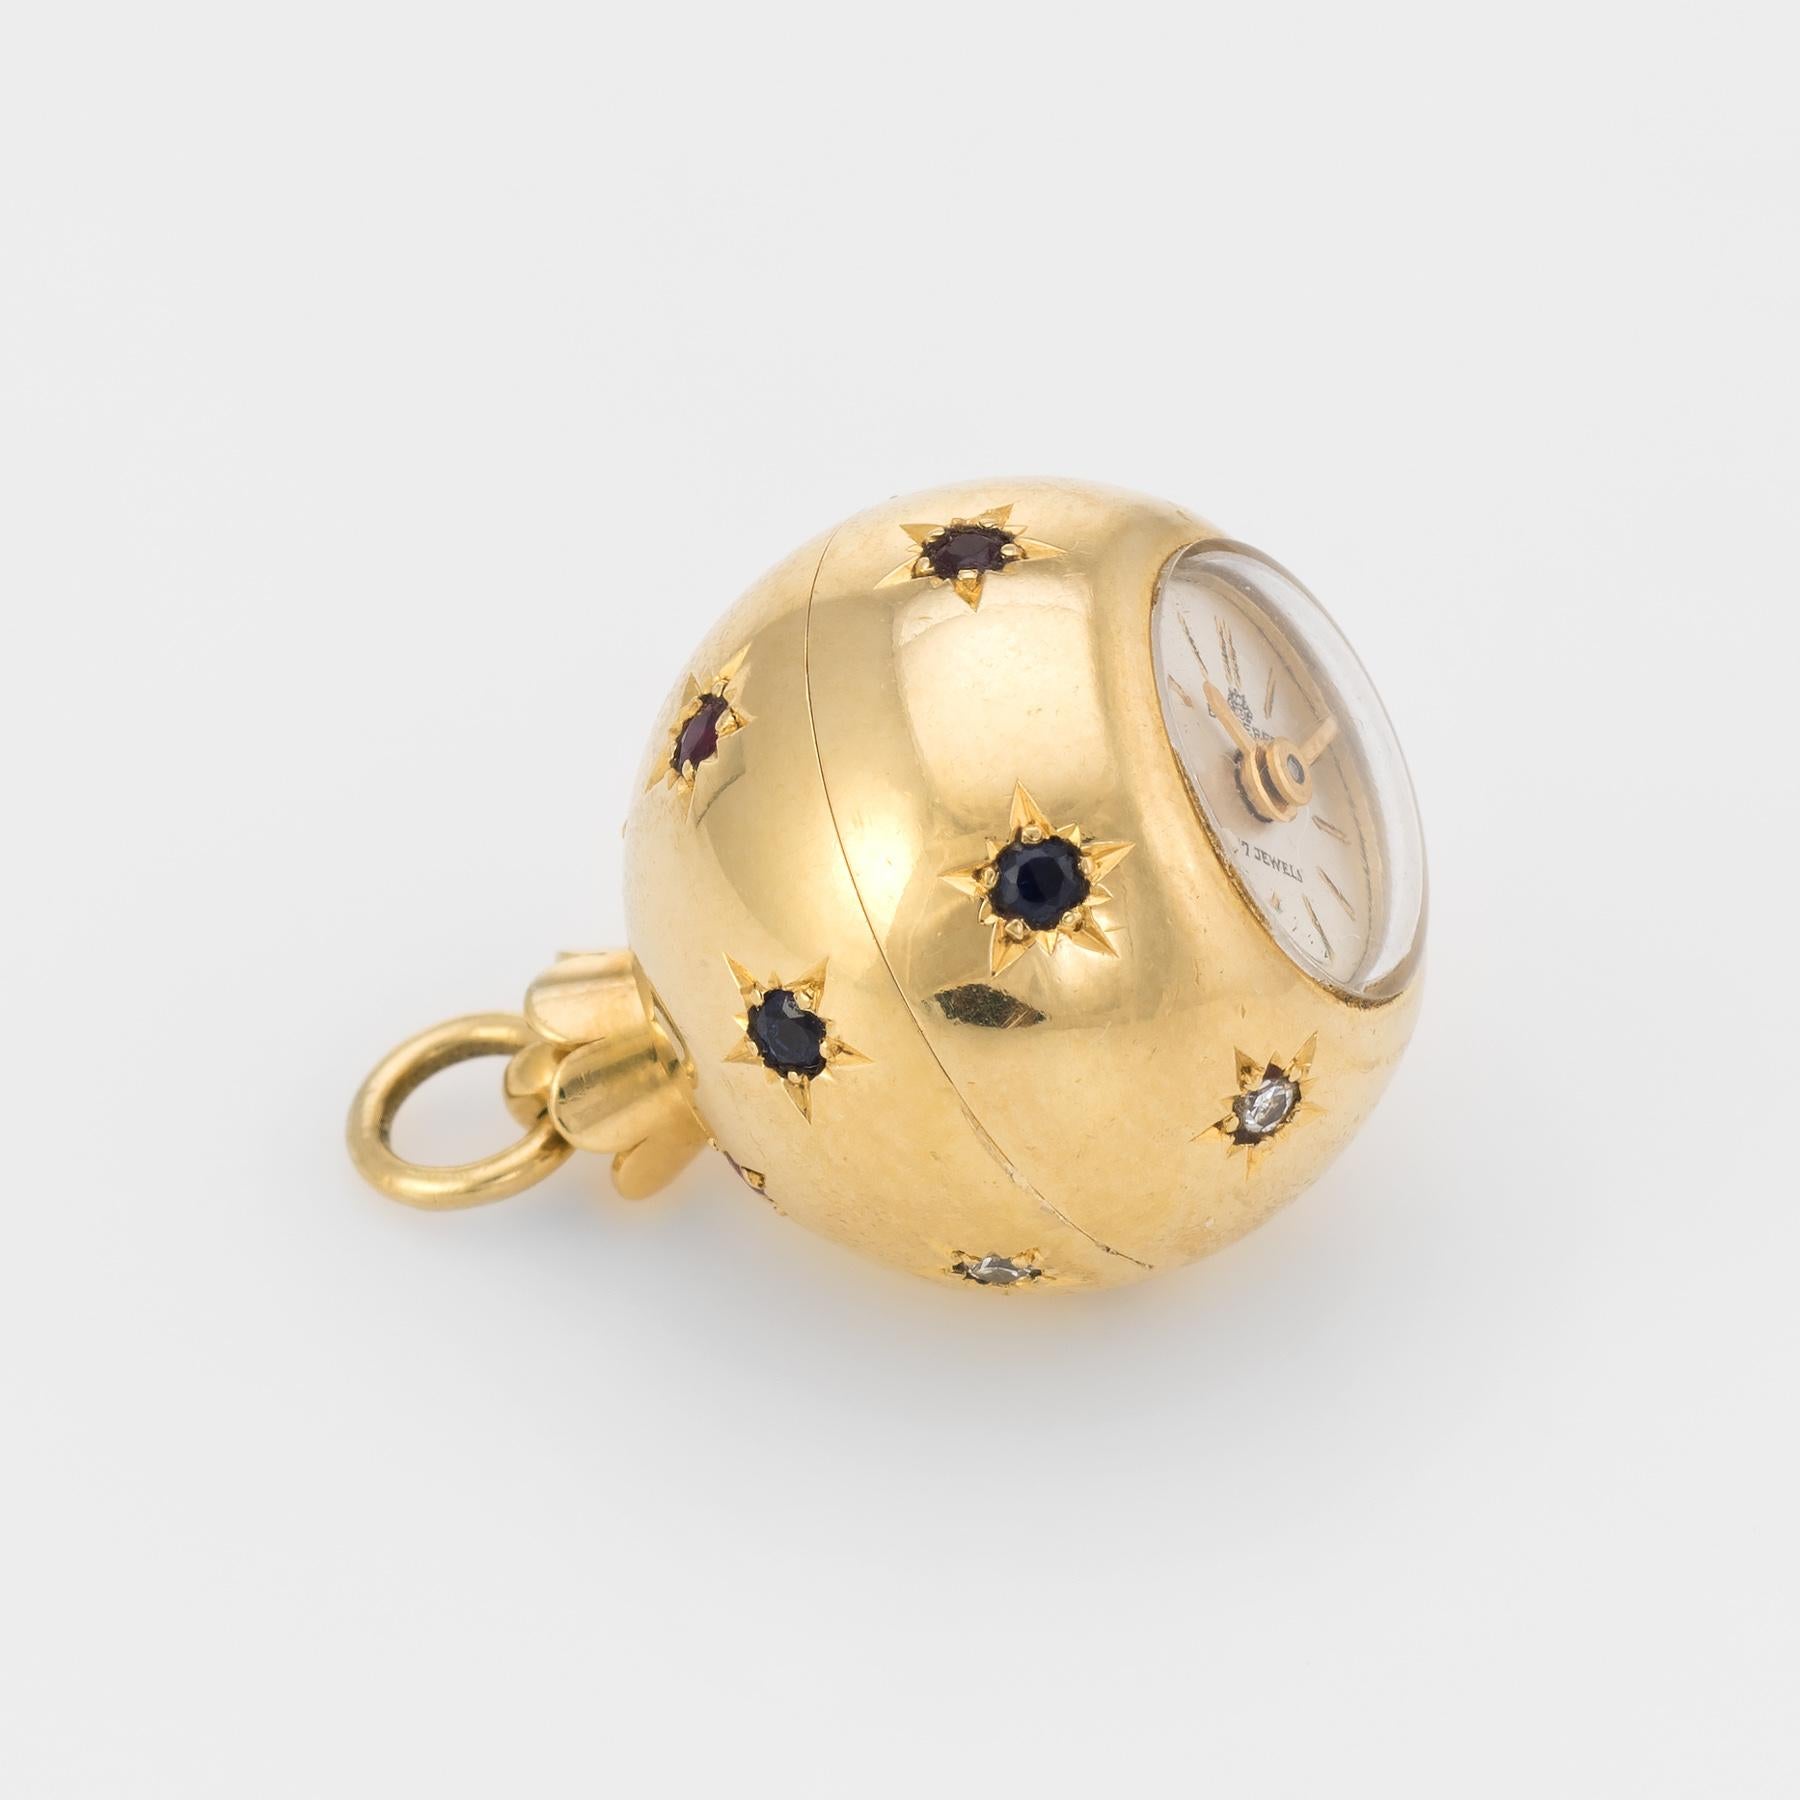 Finely detailed Bucherer pendant watch, crafted in 18 karat yellow gold.

The orb is set with diamonds that total an estimated 0.06 carats (estimated at I color and SI1 clarity), sapphires total an estimated 0.05 carats and rubies total an estimated